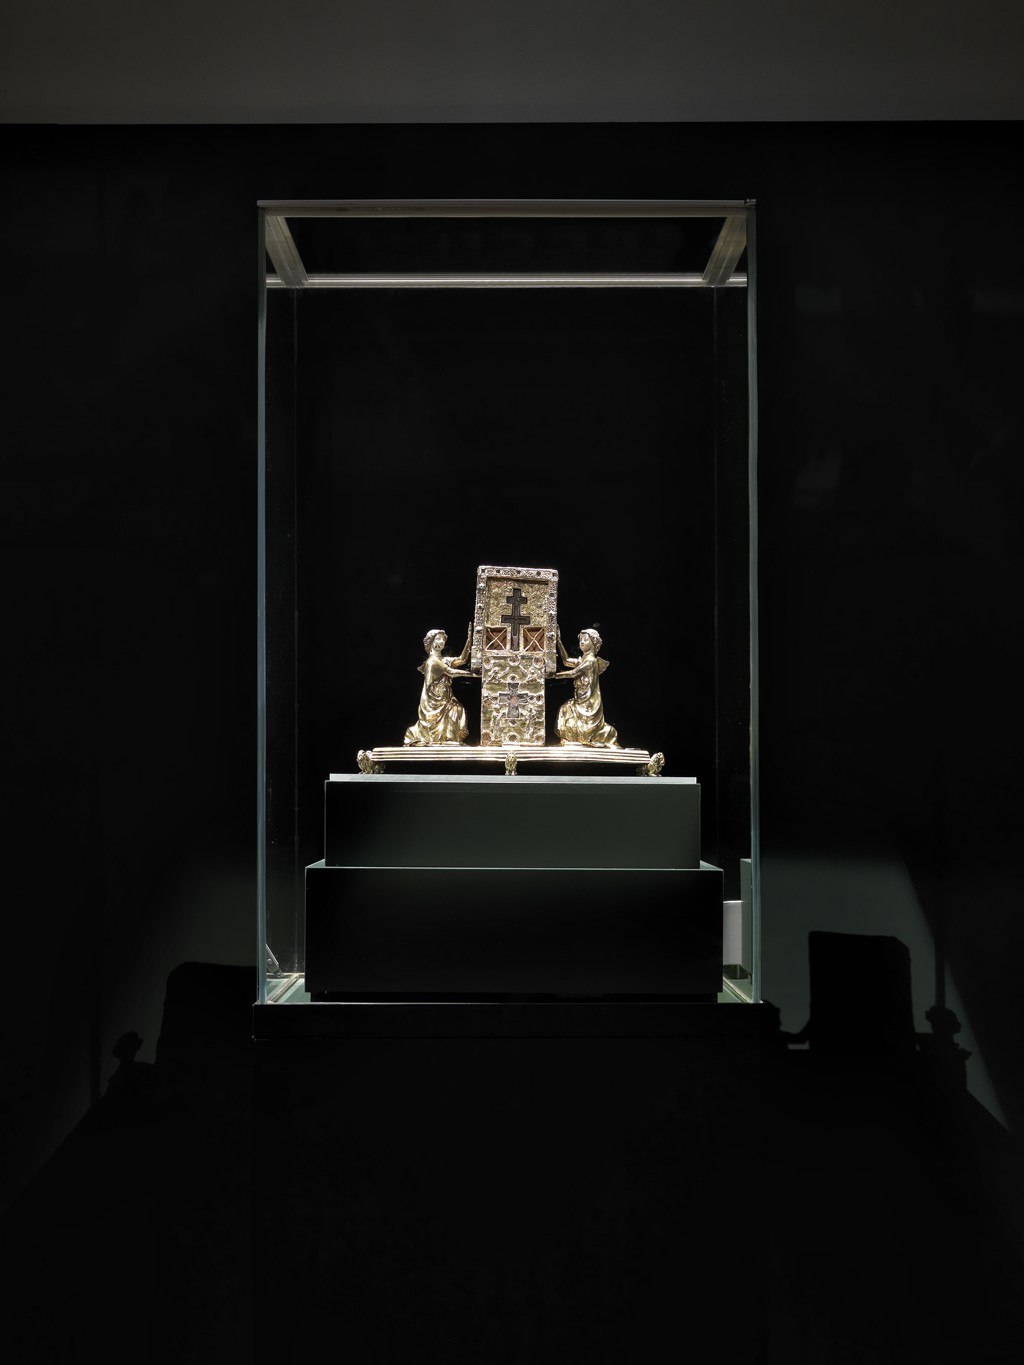 Works of Art from Louvre to Thessaloniki: The Reliquary of the True Cross